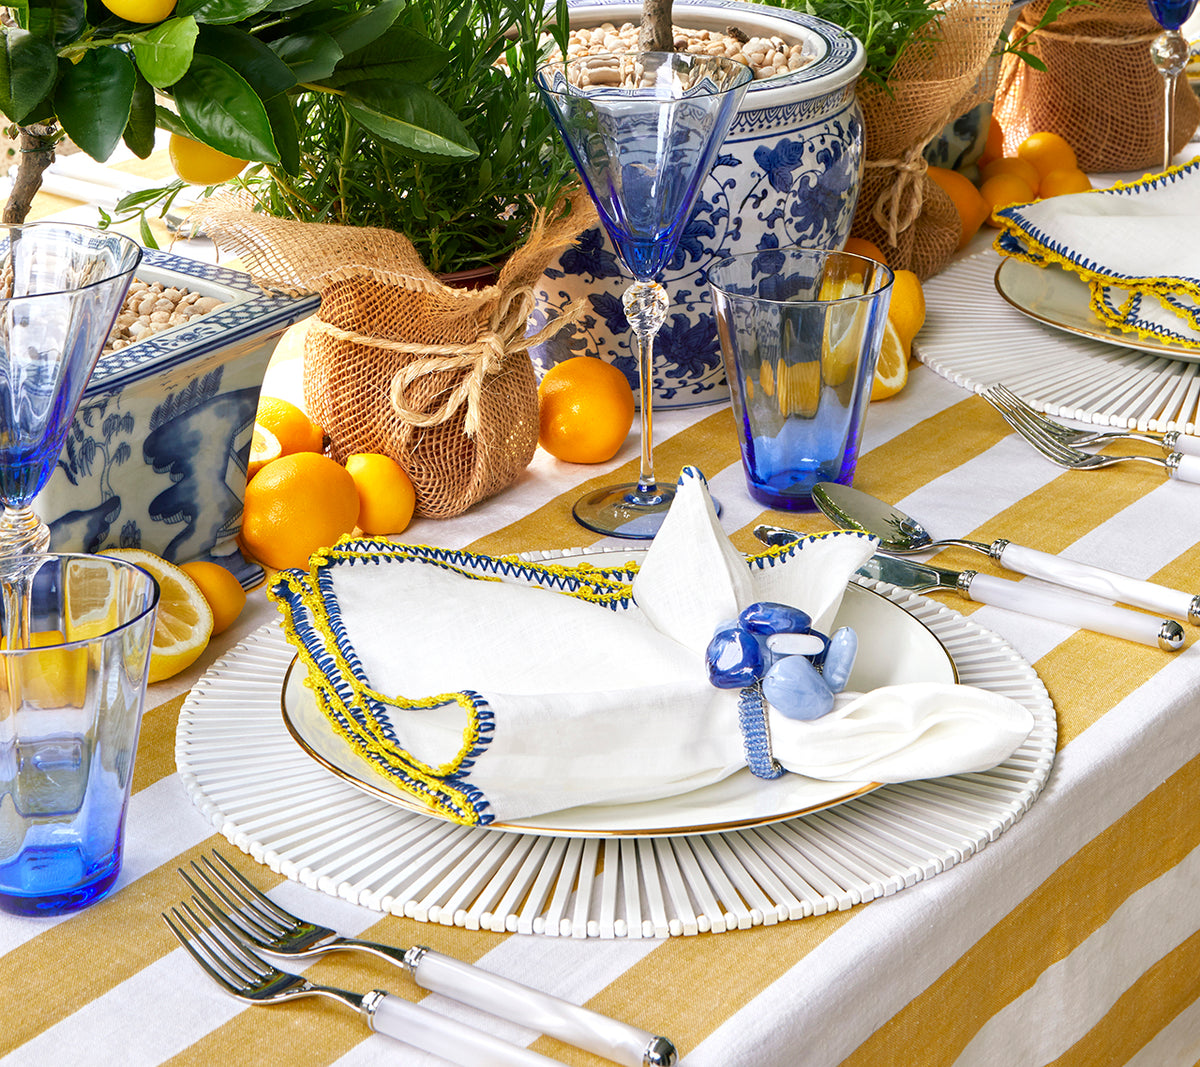 Knotted Edge Napkin in White, Blue & Yellow, Set of 4